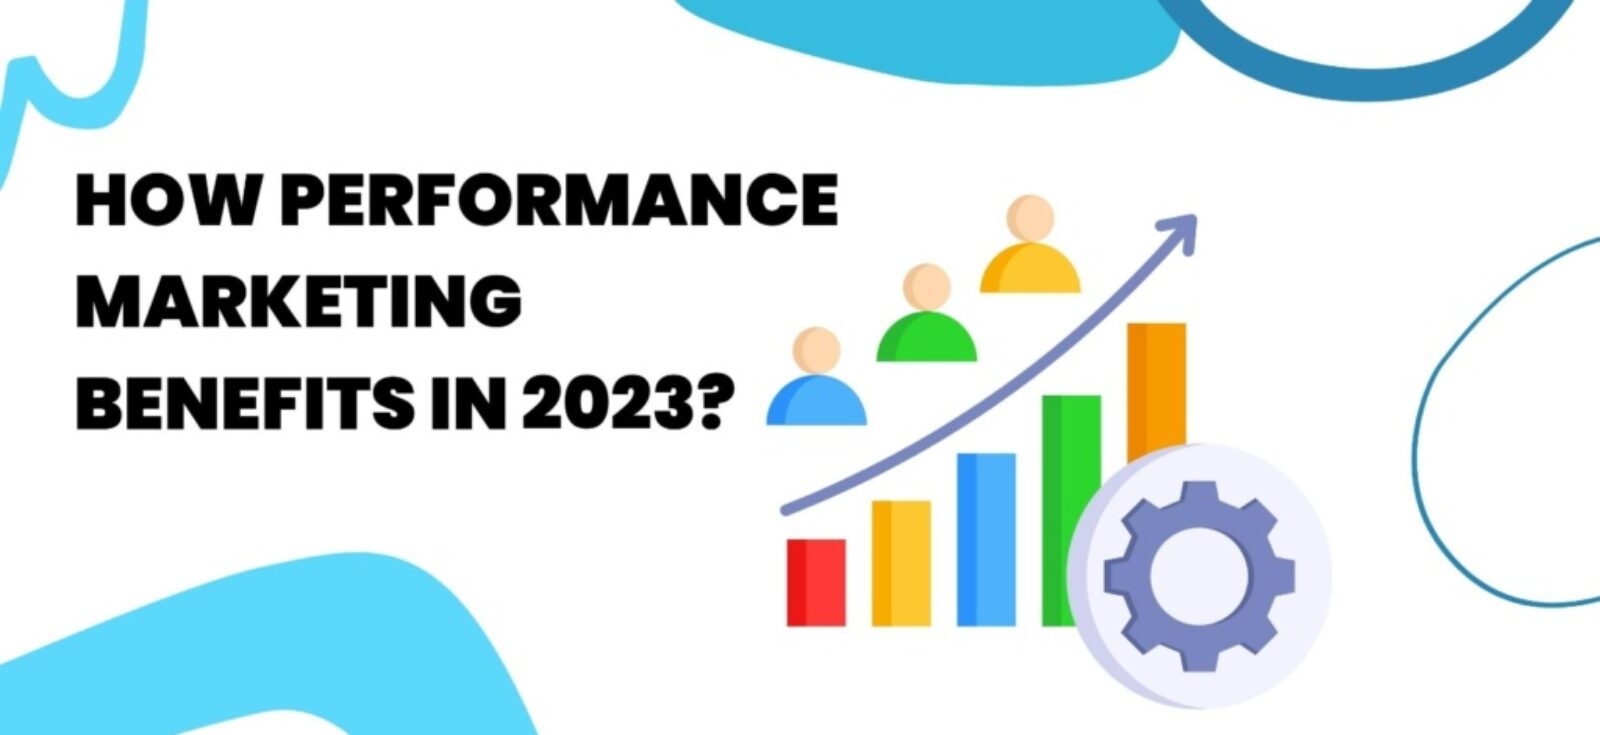 How performance marketing benefit in 2023?